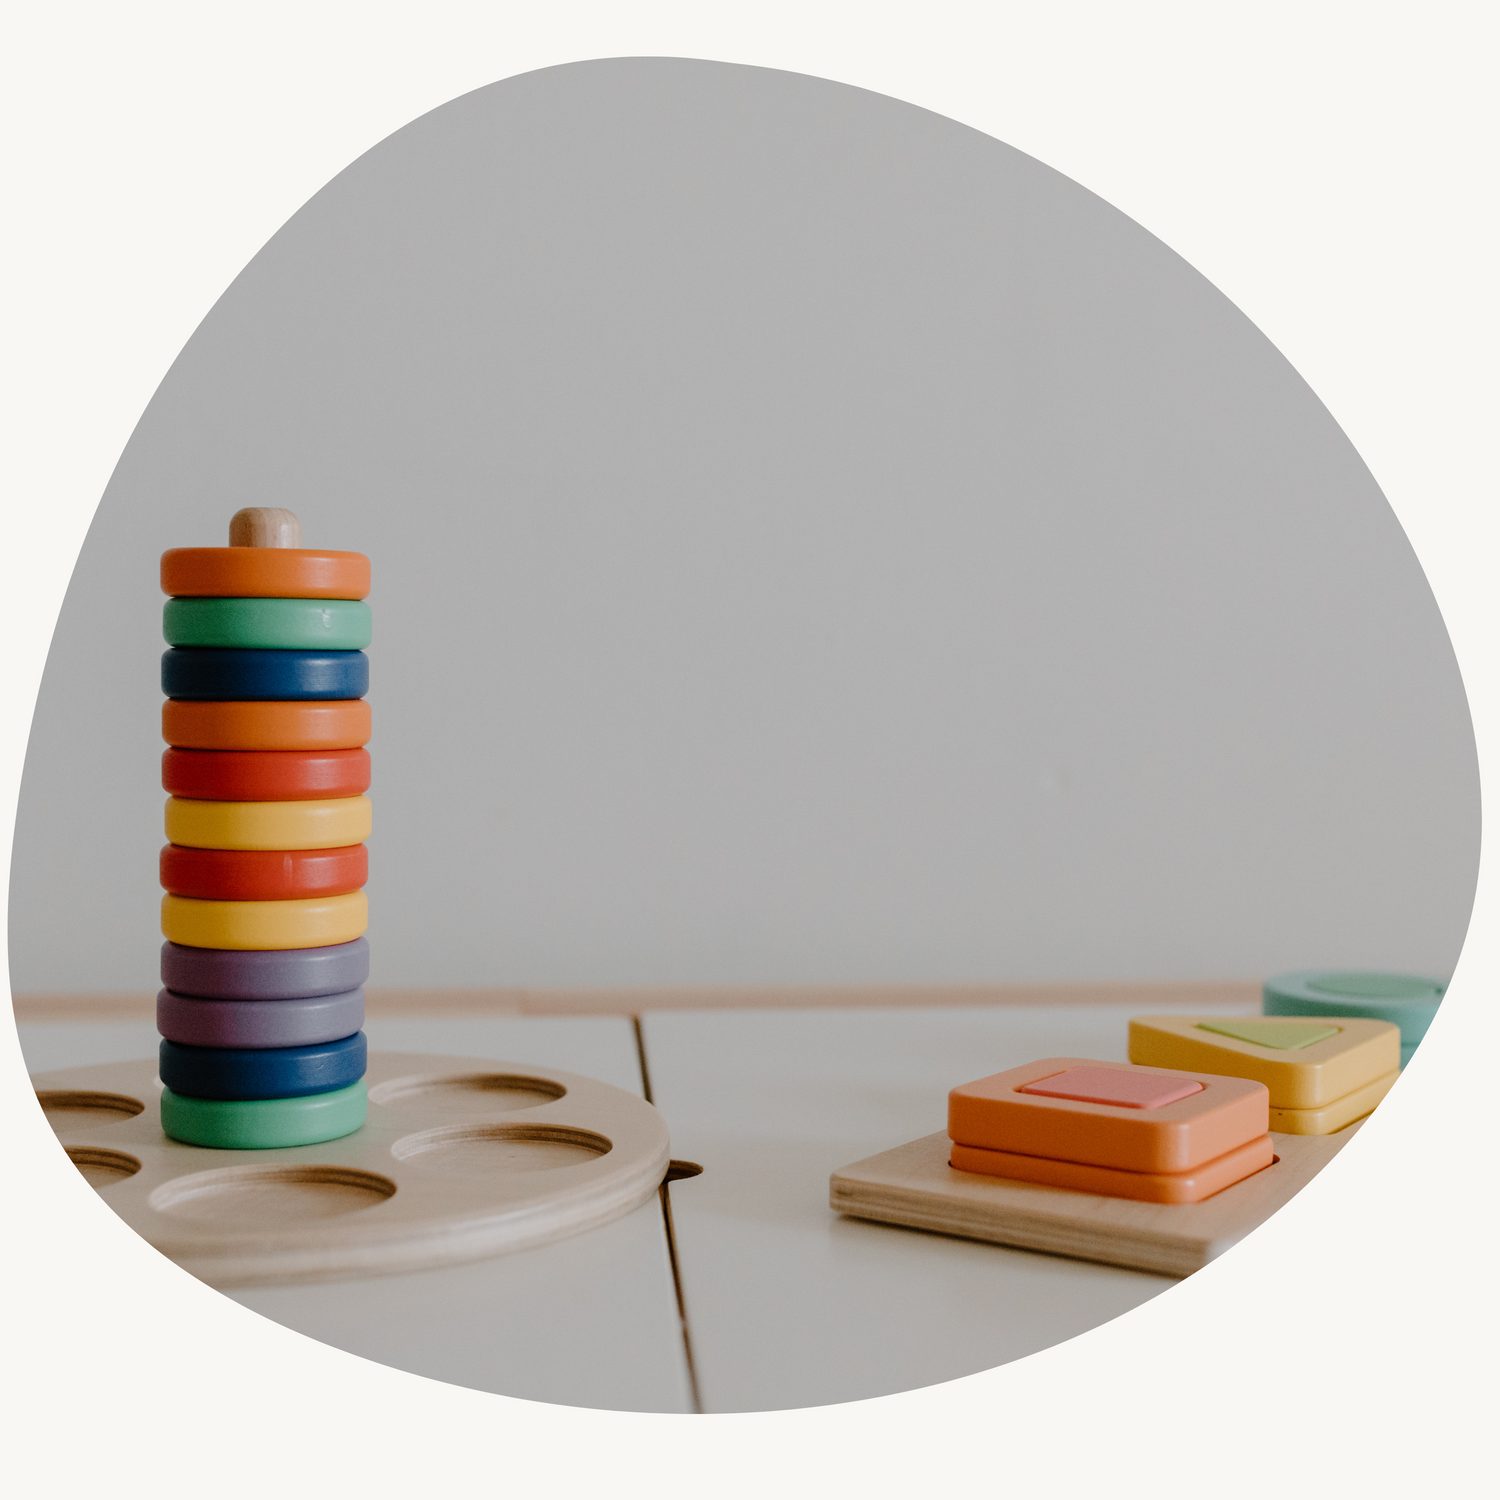 Experience beauty and sustainability with our Wooden Collection.  We offer a wide variety of wooden toys that spark joy and imagination, while fitting naturally into your interior.